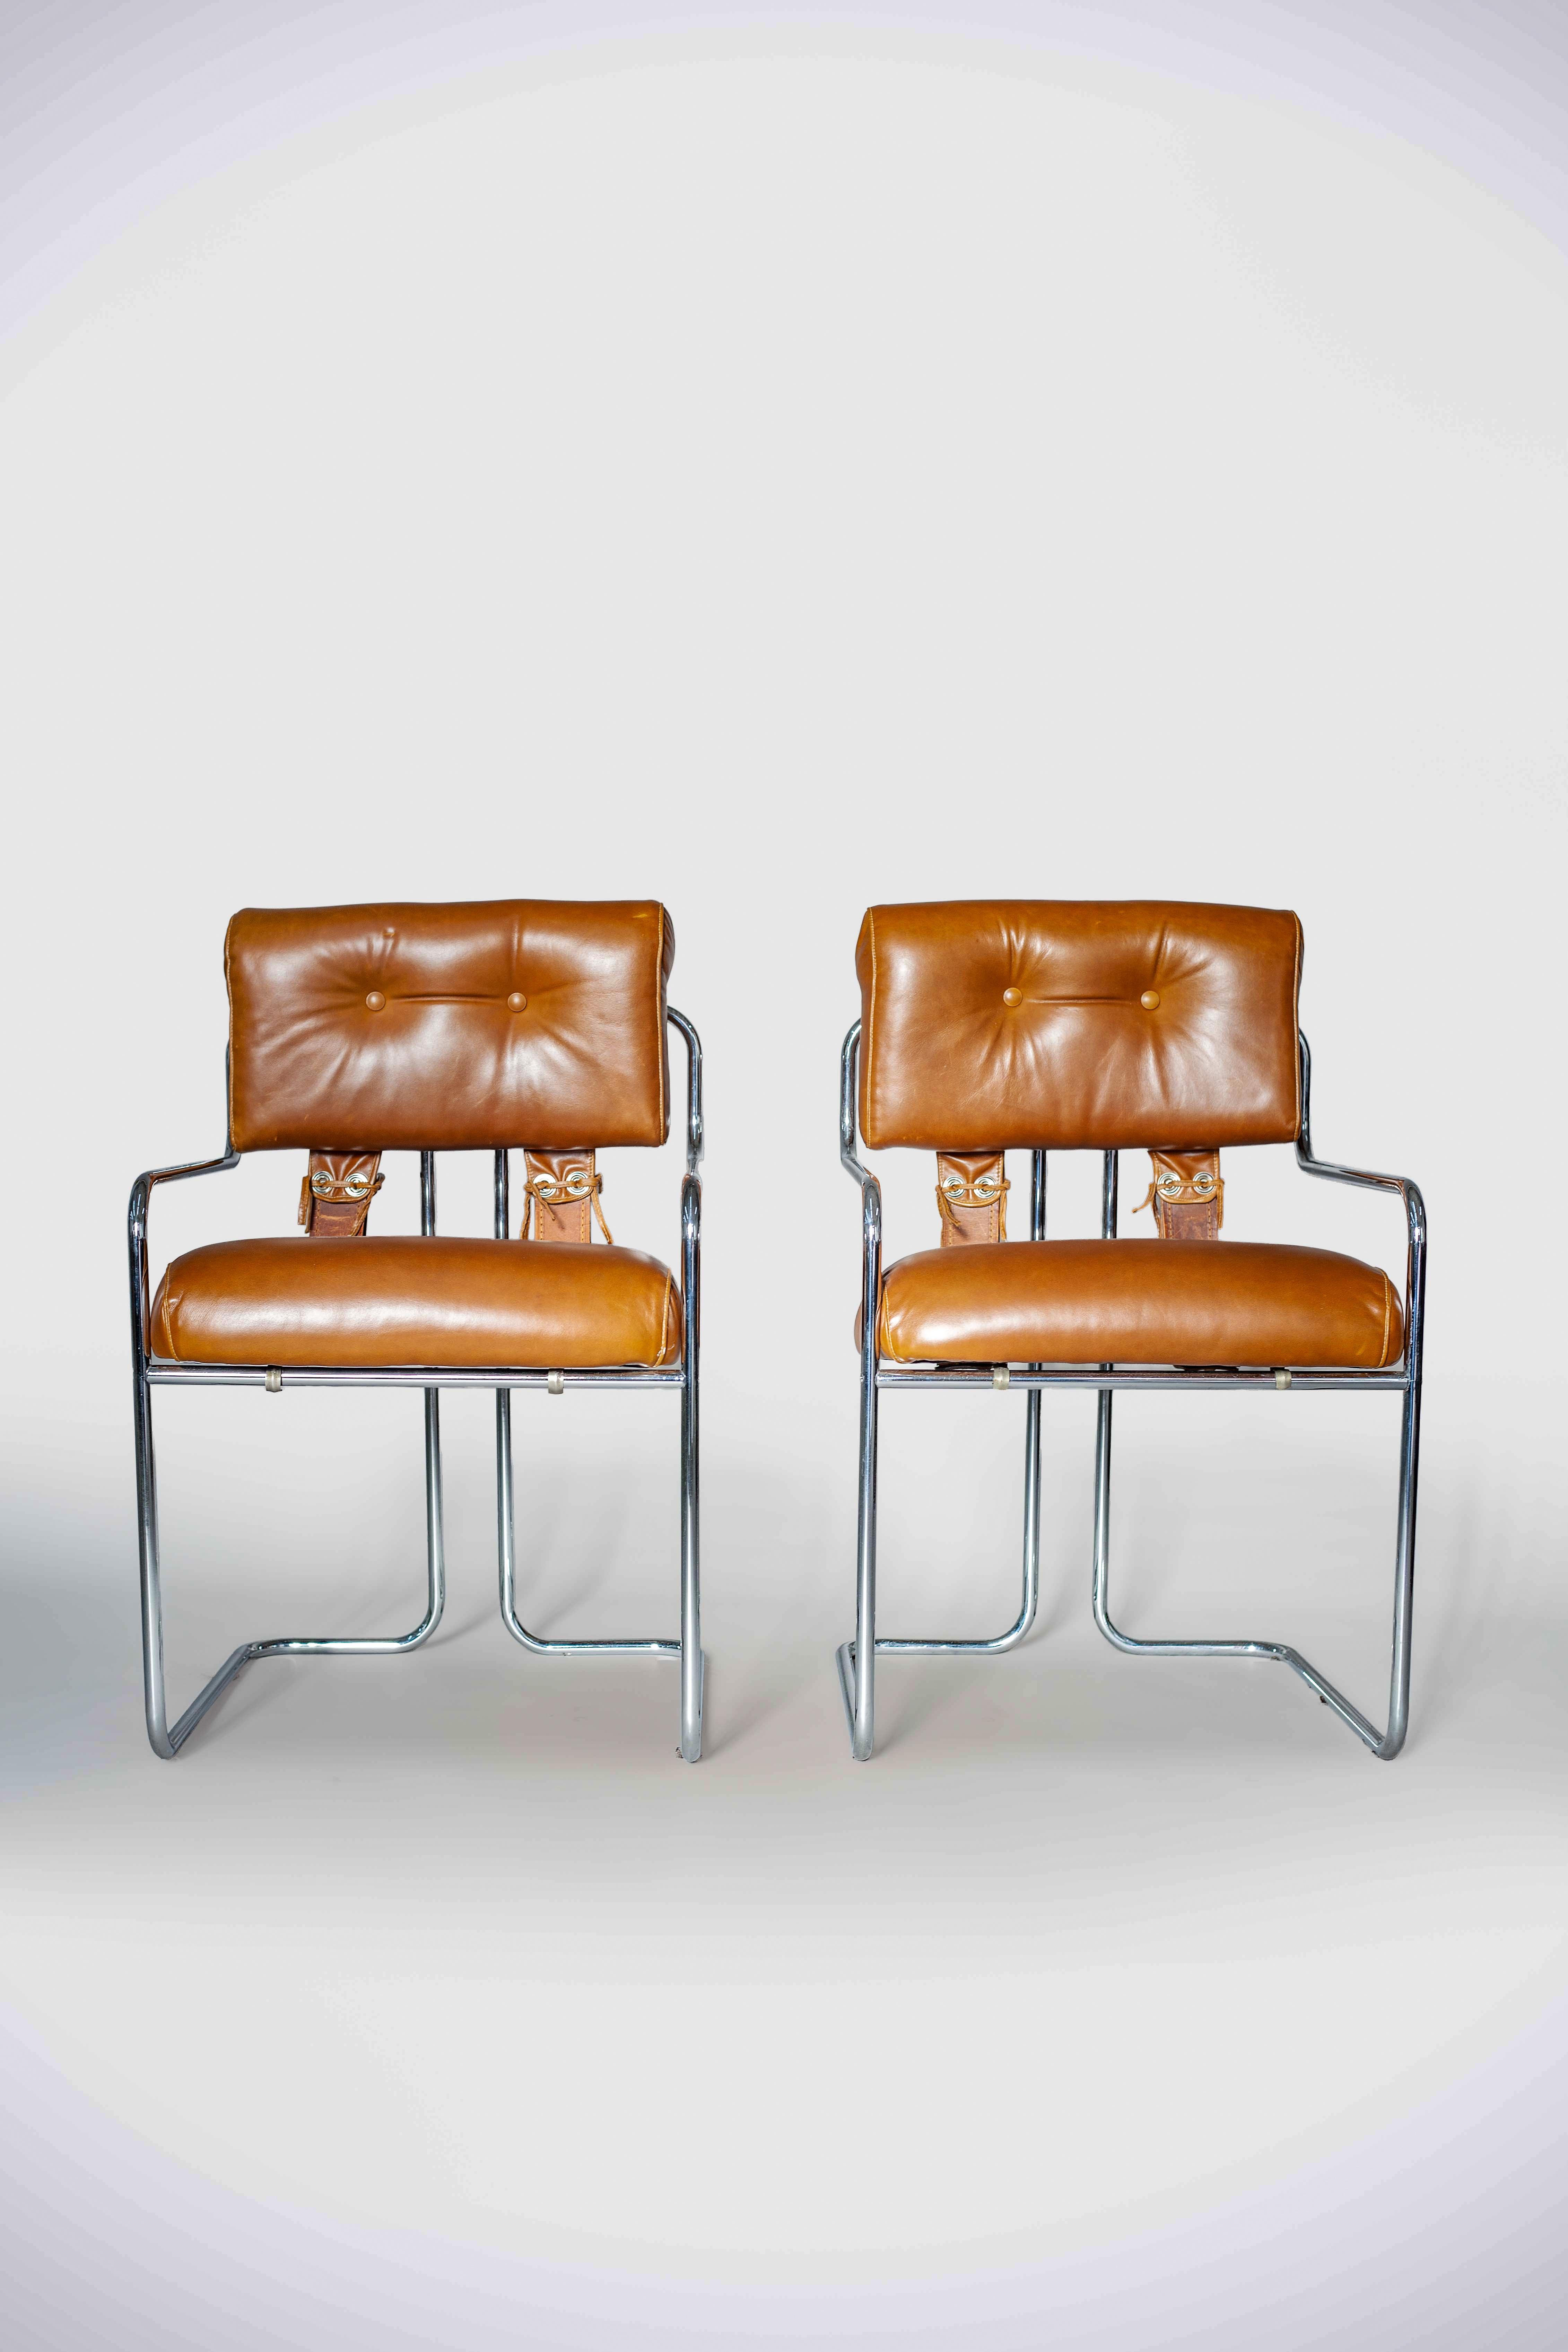 Set of 2 chairs by Guido Faleschini for I4 Mariani. Vintage Italian circa 1970s. Chromed steel tubing, brown leather newly reupholstered in excellent condition. 

